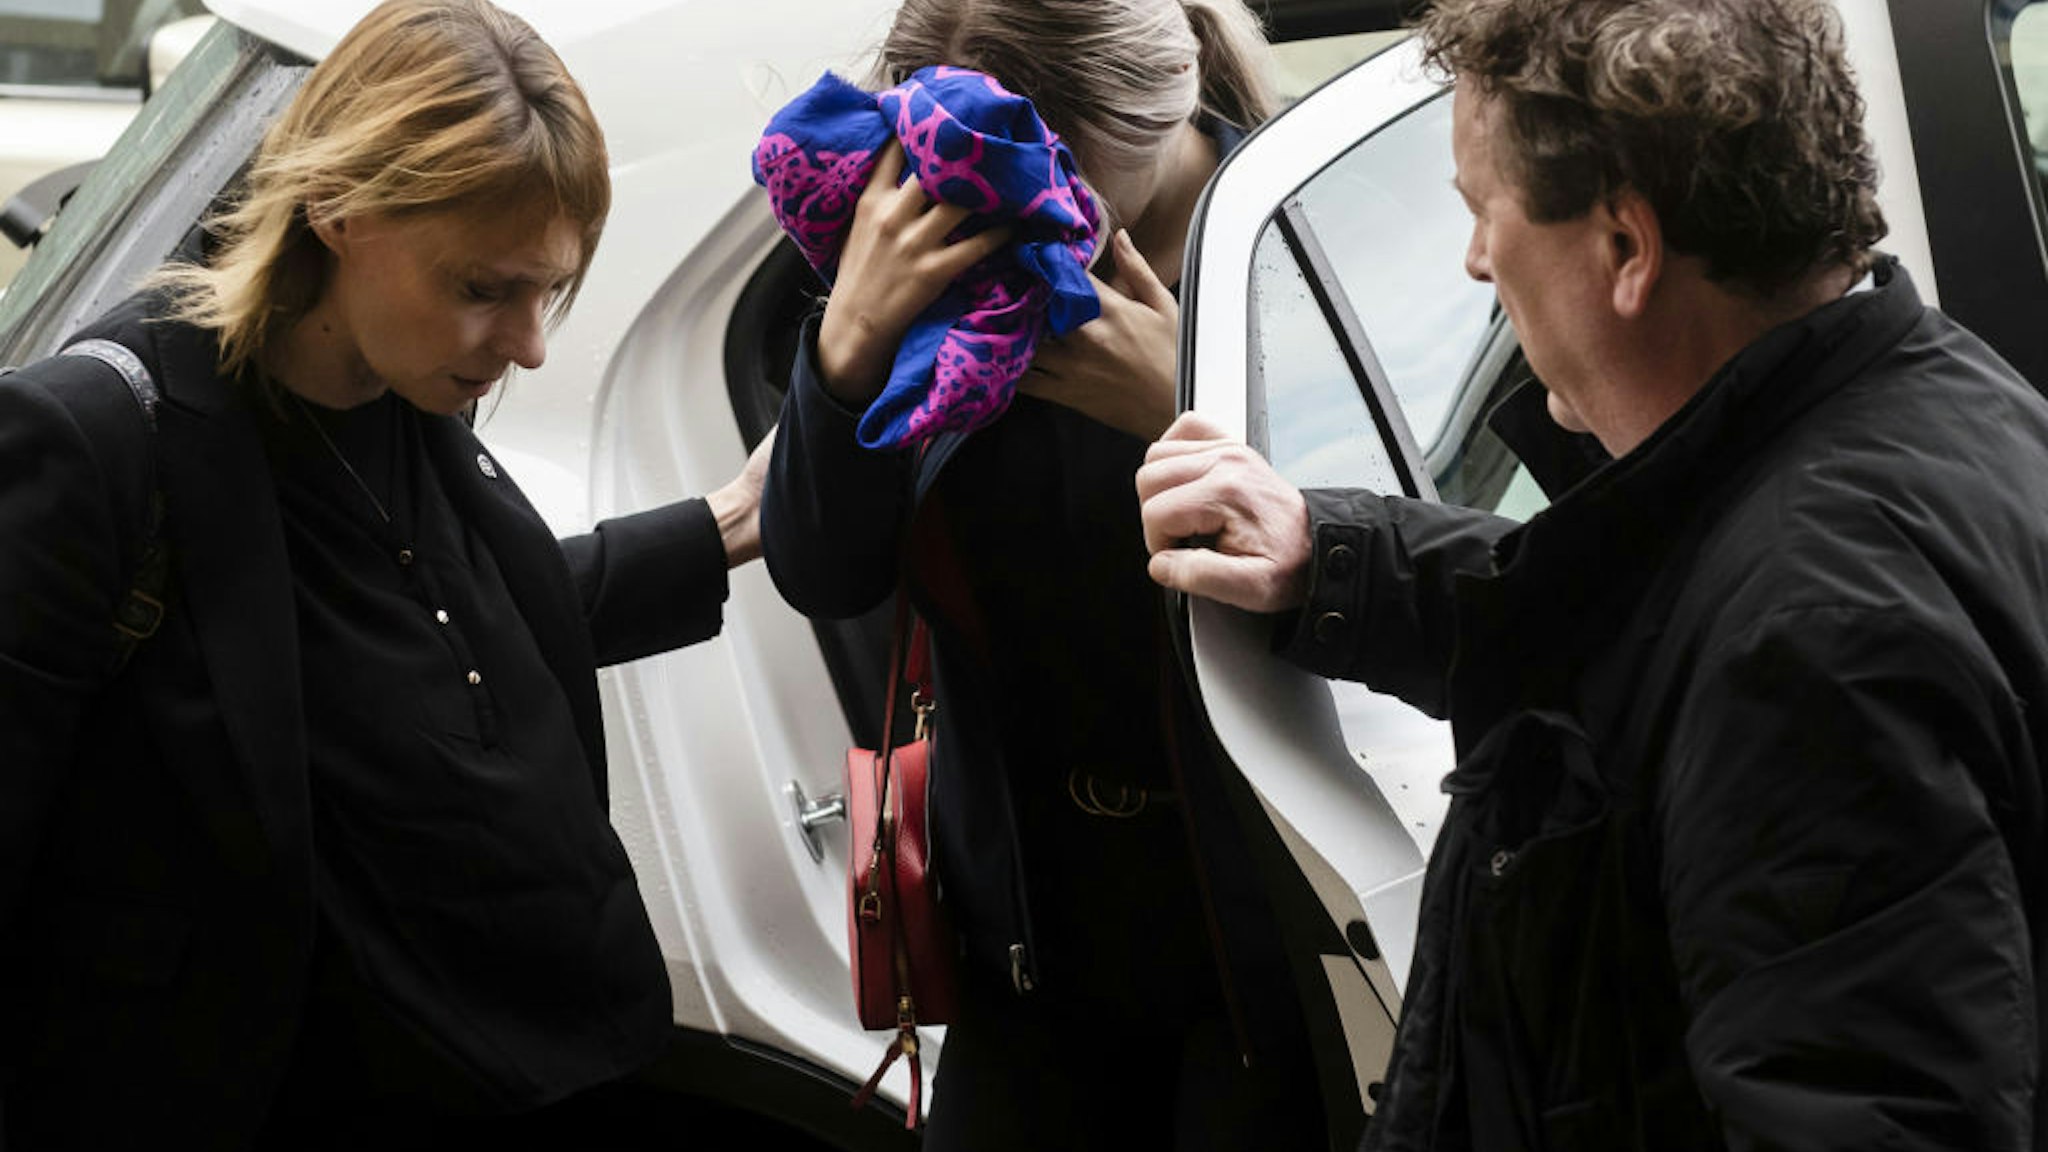 A British teenager (C) accused of falsely claiming she was raped by Israeli tourists, covers her face as she arrives for her trial at the Famagusta District Court in Paralimni in eastern Cyprus, on December 30, 2019.